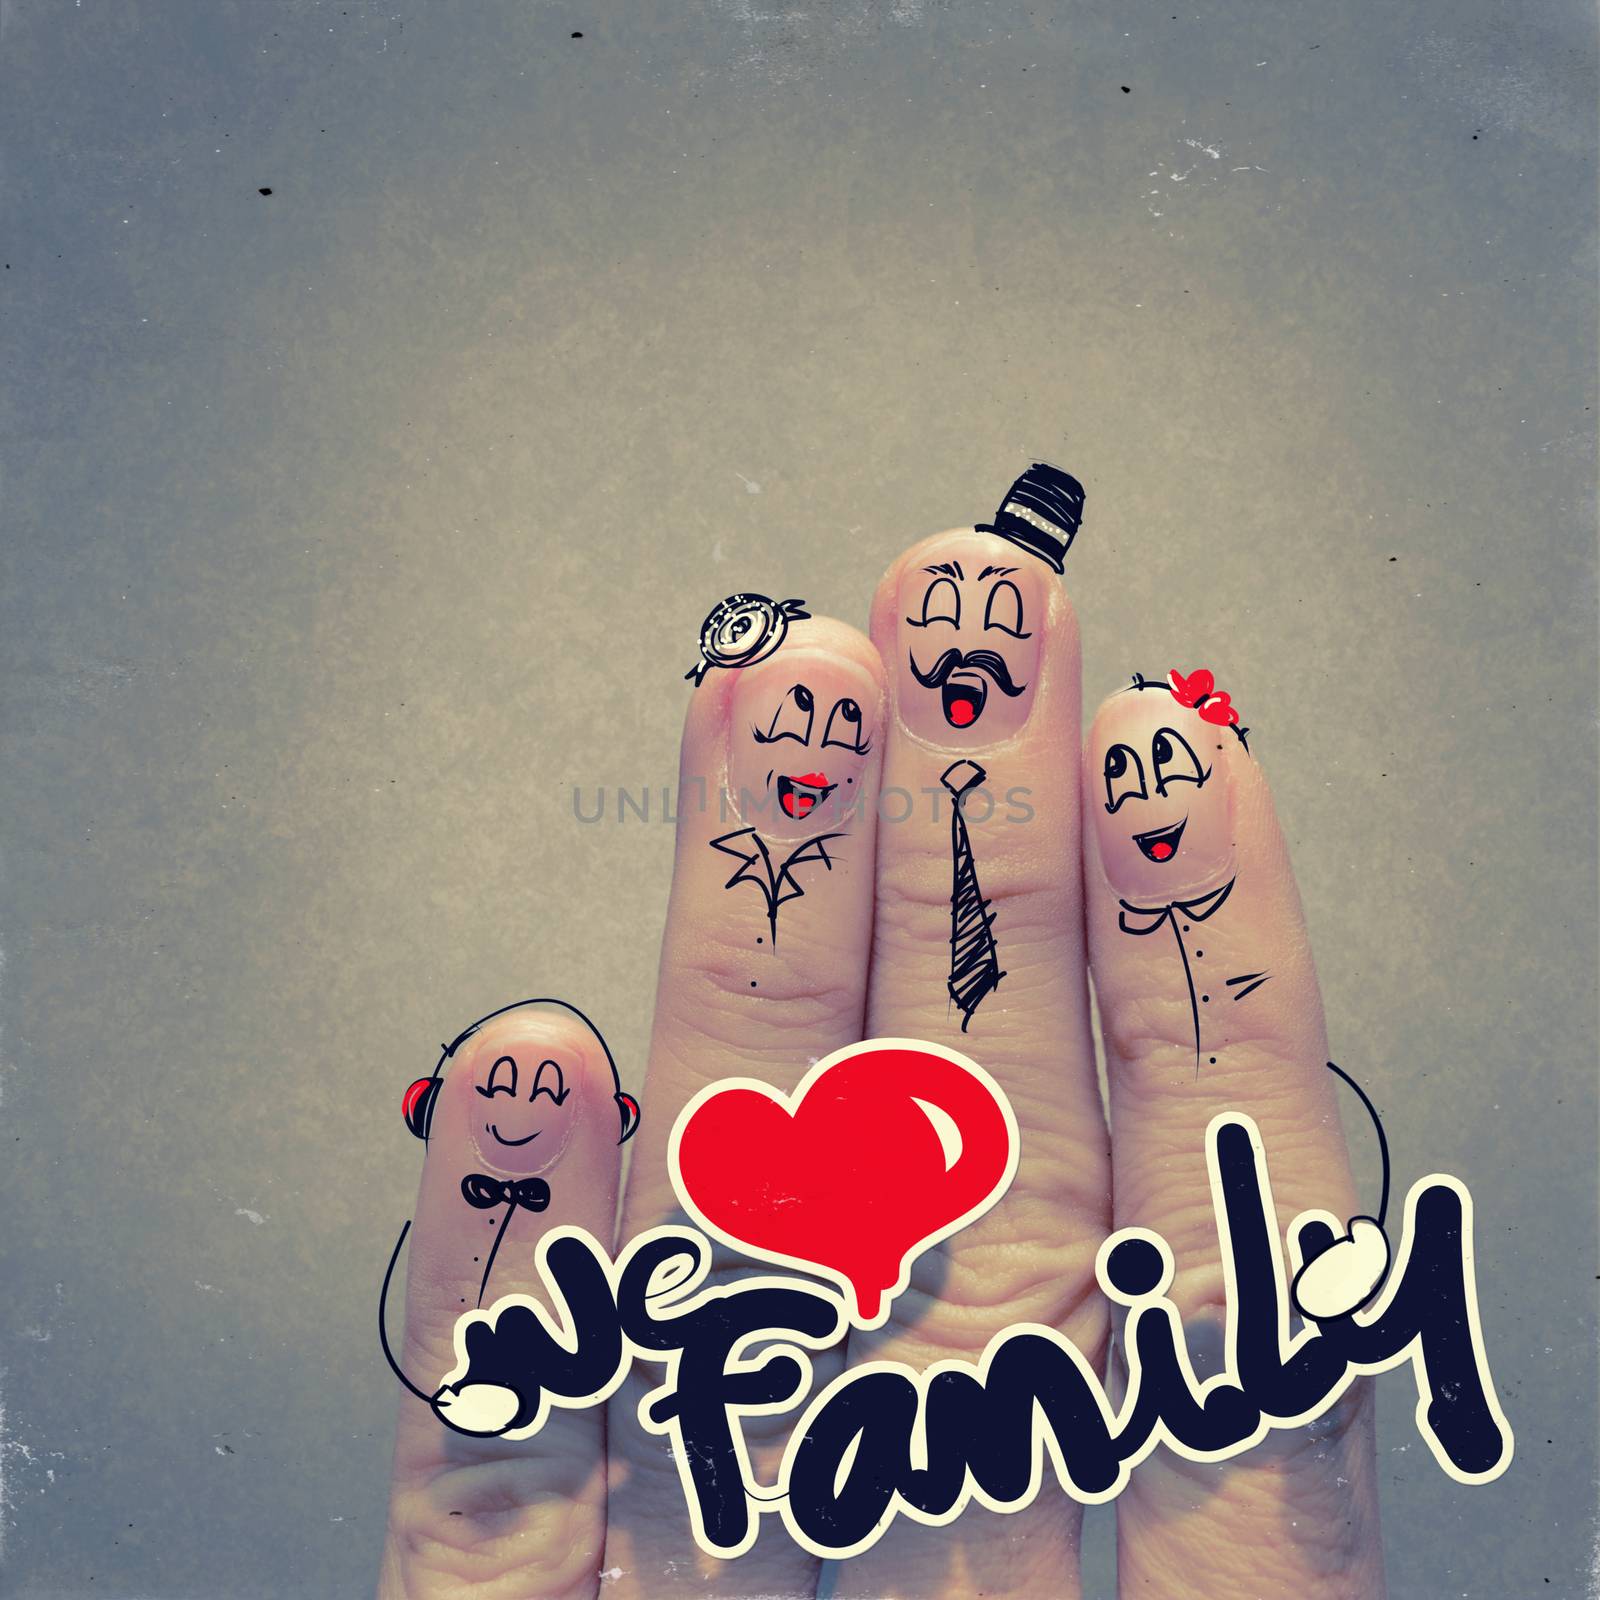 the happy finger family holding we love family word